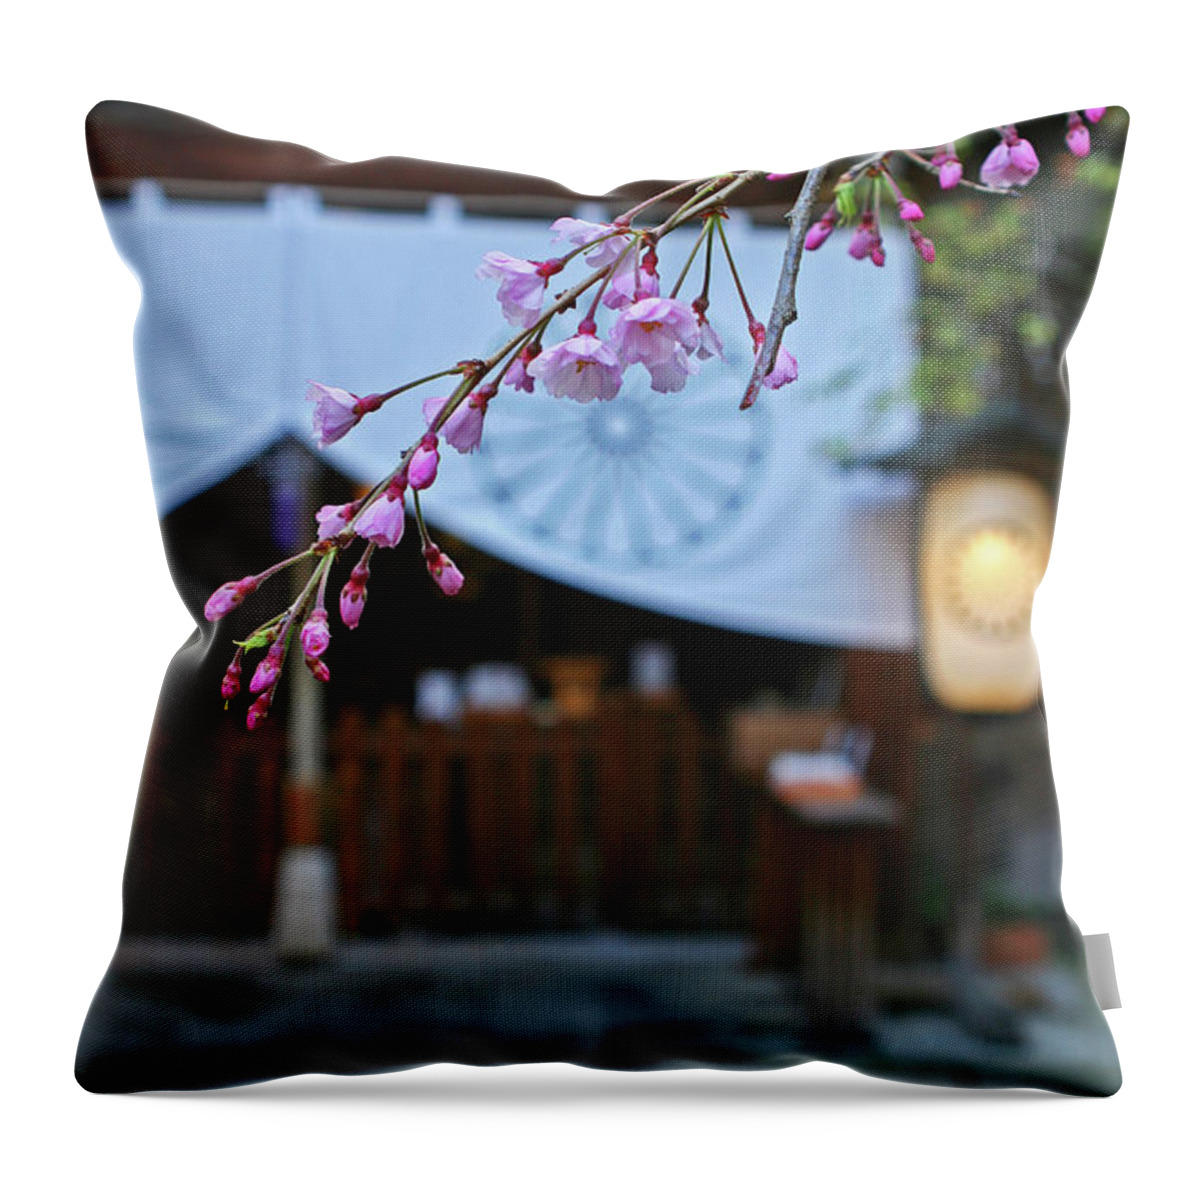 Shinto Throw Pillow featuring the photograph Shinto Blessing by Marcel Stevahn